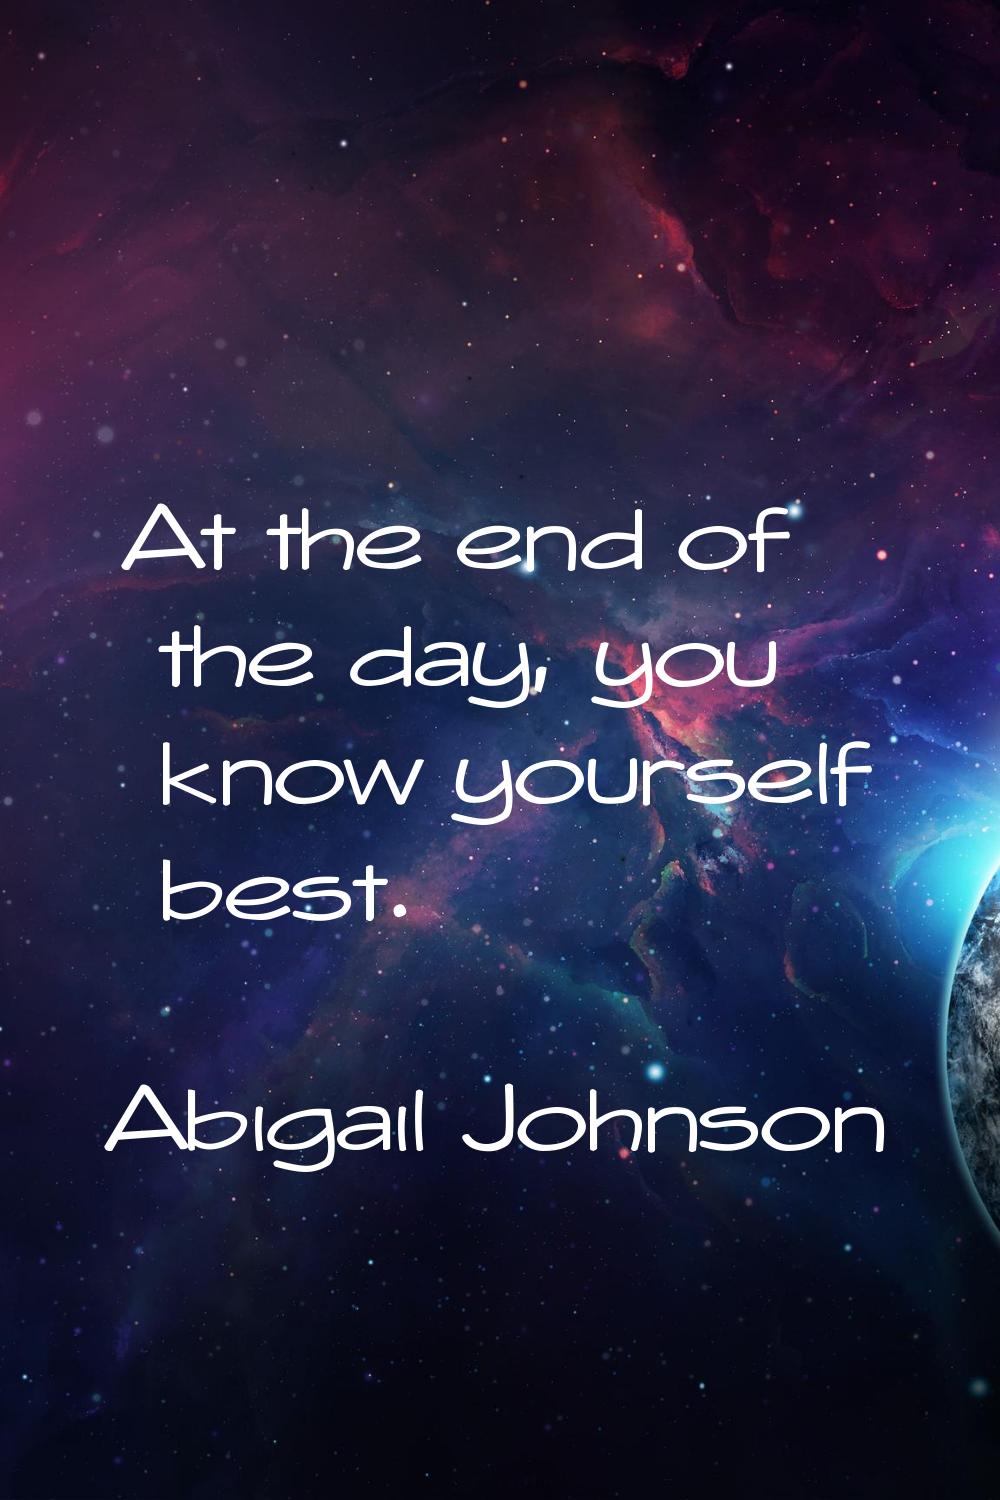 At the end of the day, you know yourself best.